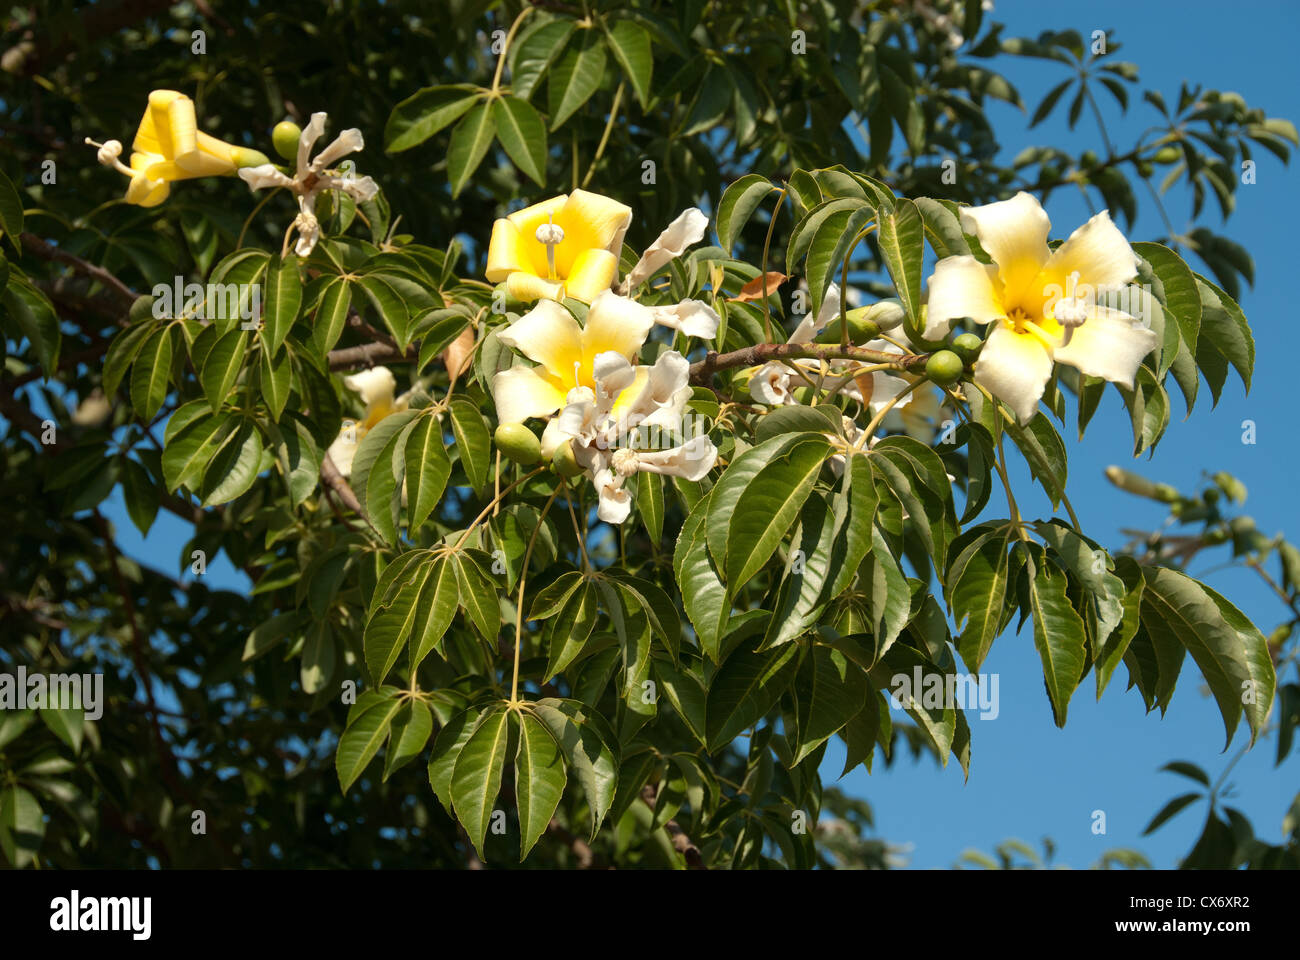 Flowers And Leaves On A White Floss Silk Tree Chorisia Insignis Also Known As A Kapok Or Drunken Tree Southern Portugal Stock Photo Alamy